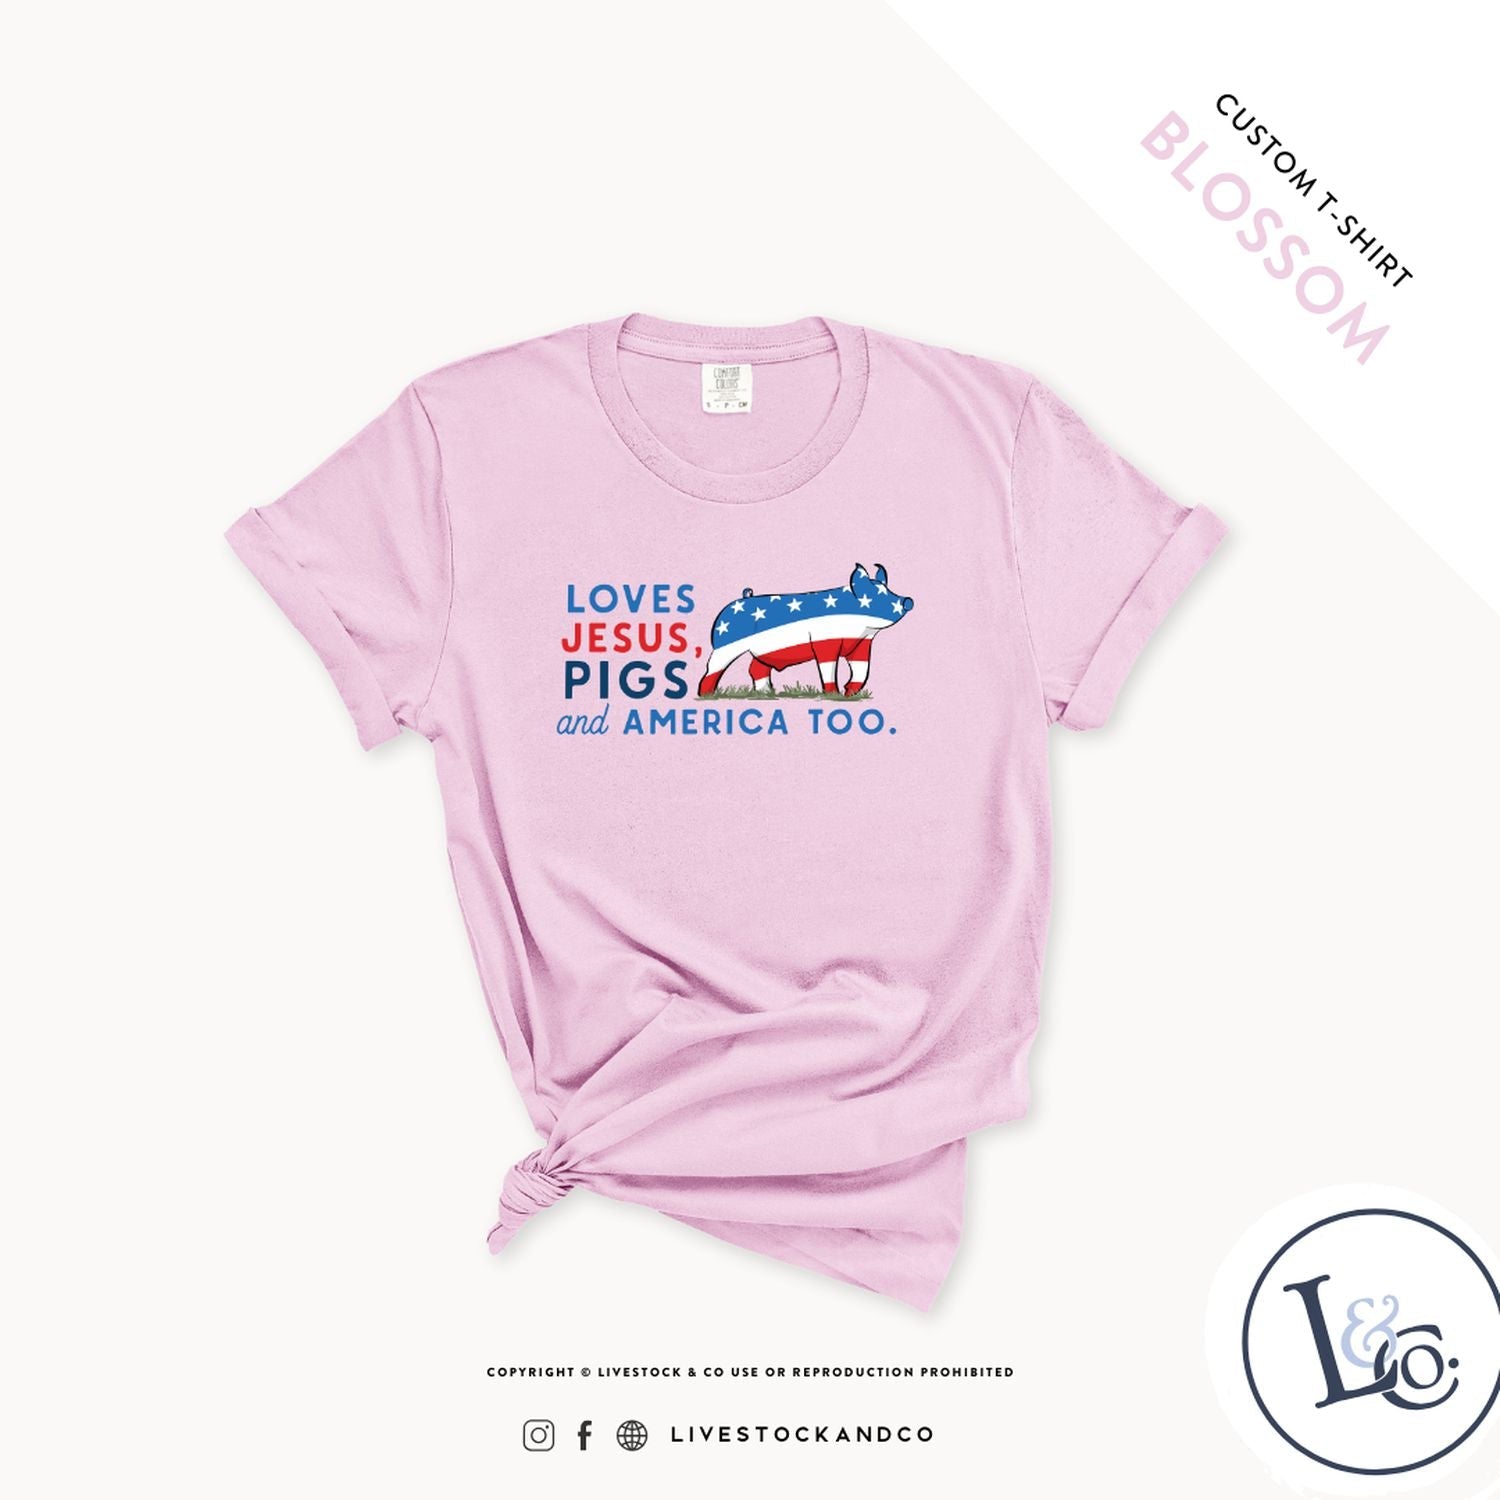 Custom Made Loves Jesus, Pigs and America Too - Youth T-Shirt Stock Show Livestock - Livestock &amp; Co. Boutique